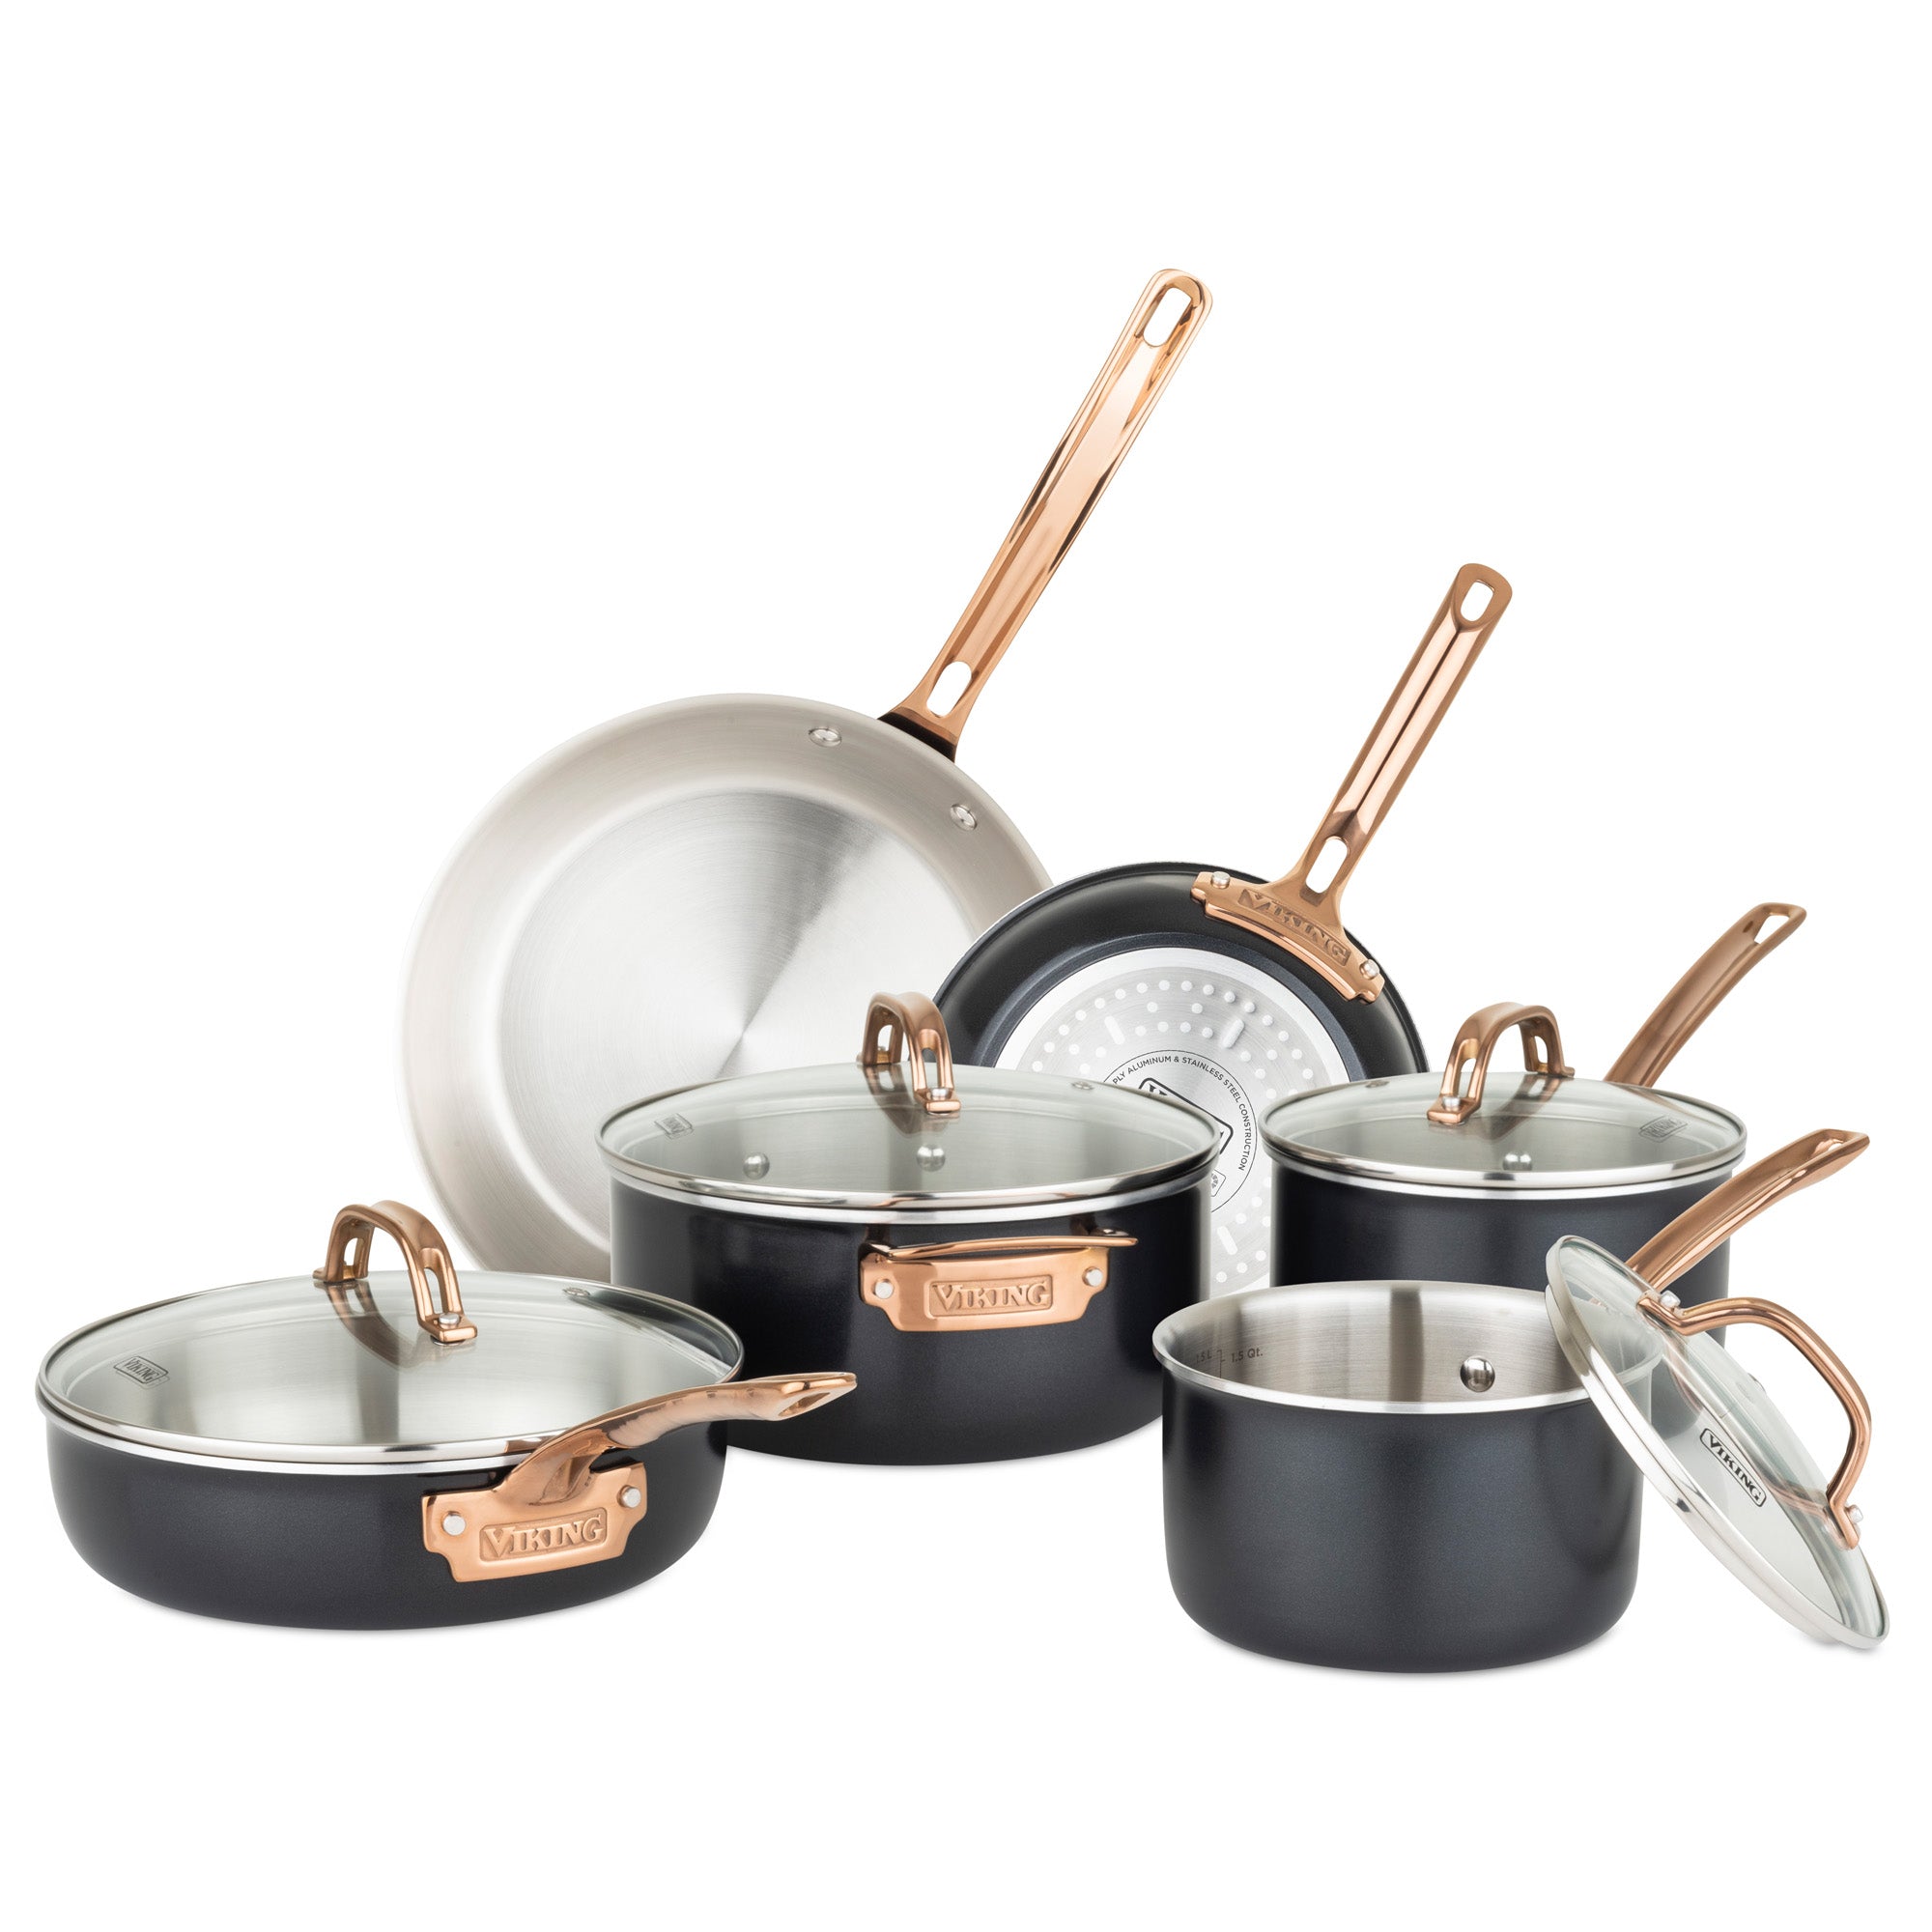 Viking Culinary 5-Ply Hard Stainless Cookware Set, 10 Piece, Hard Anodized  Exterior, Dishwasher, Oven Safe, Works on All Cooktops including